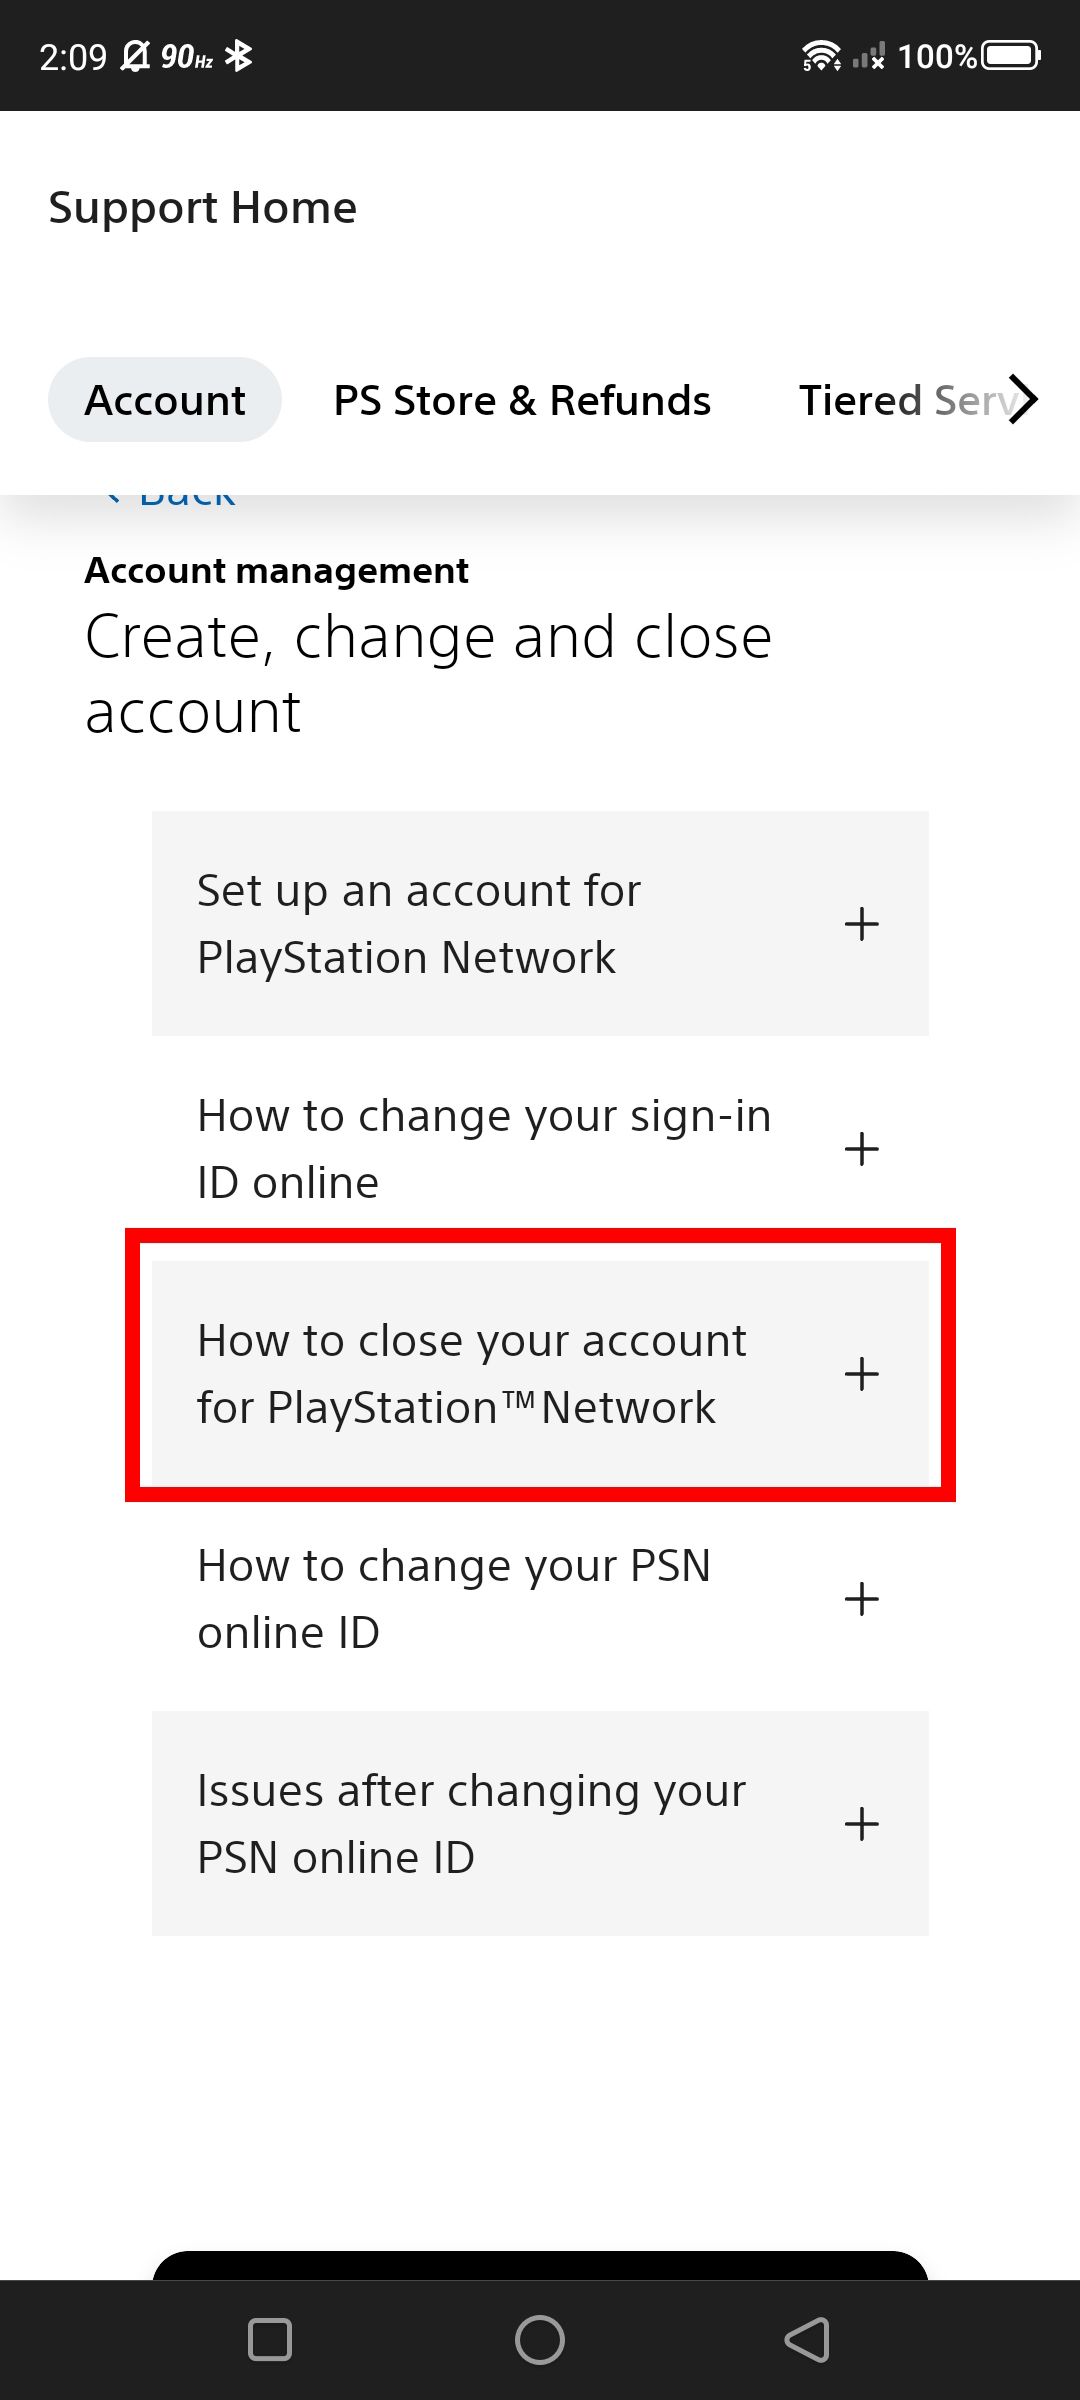 Red rectangle outline over How to close your account for PlayStation Network on the PlayStation Support page